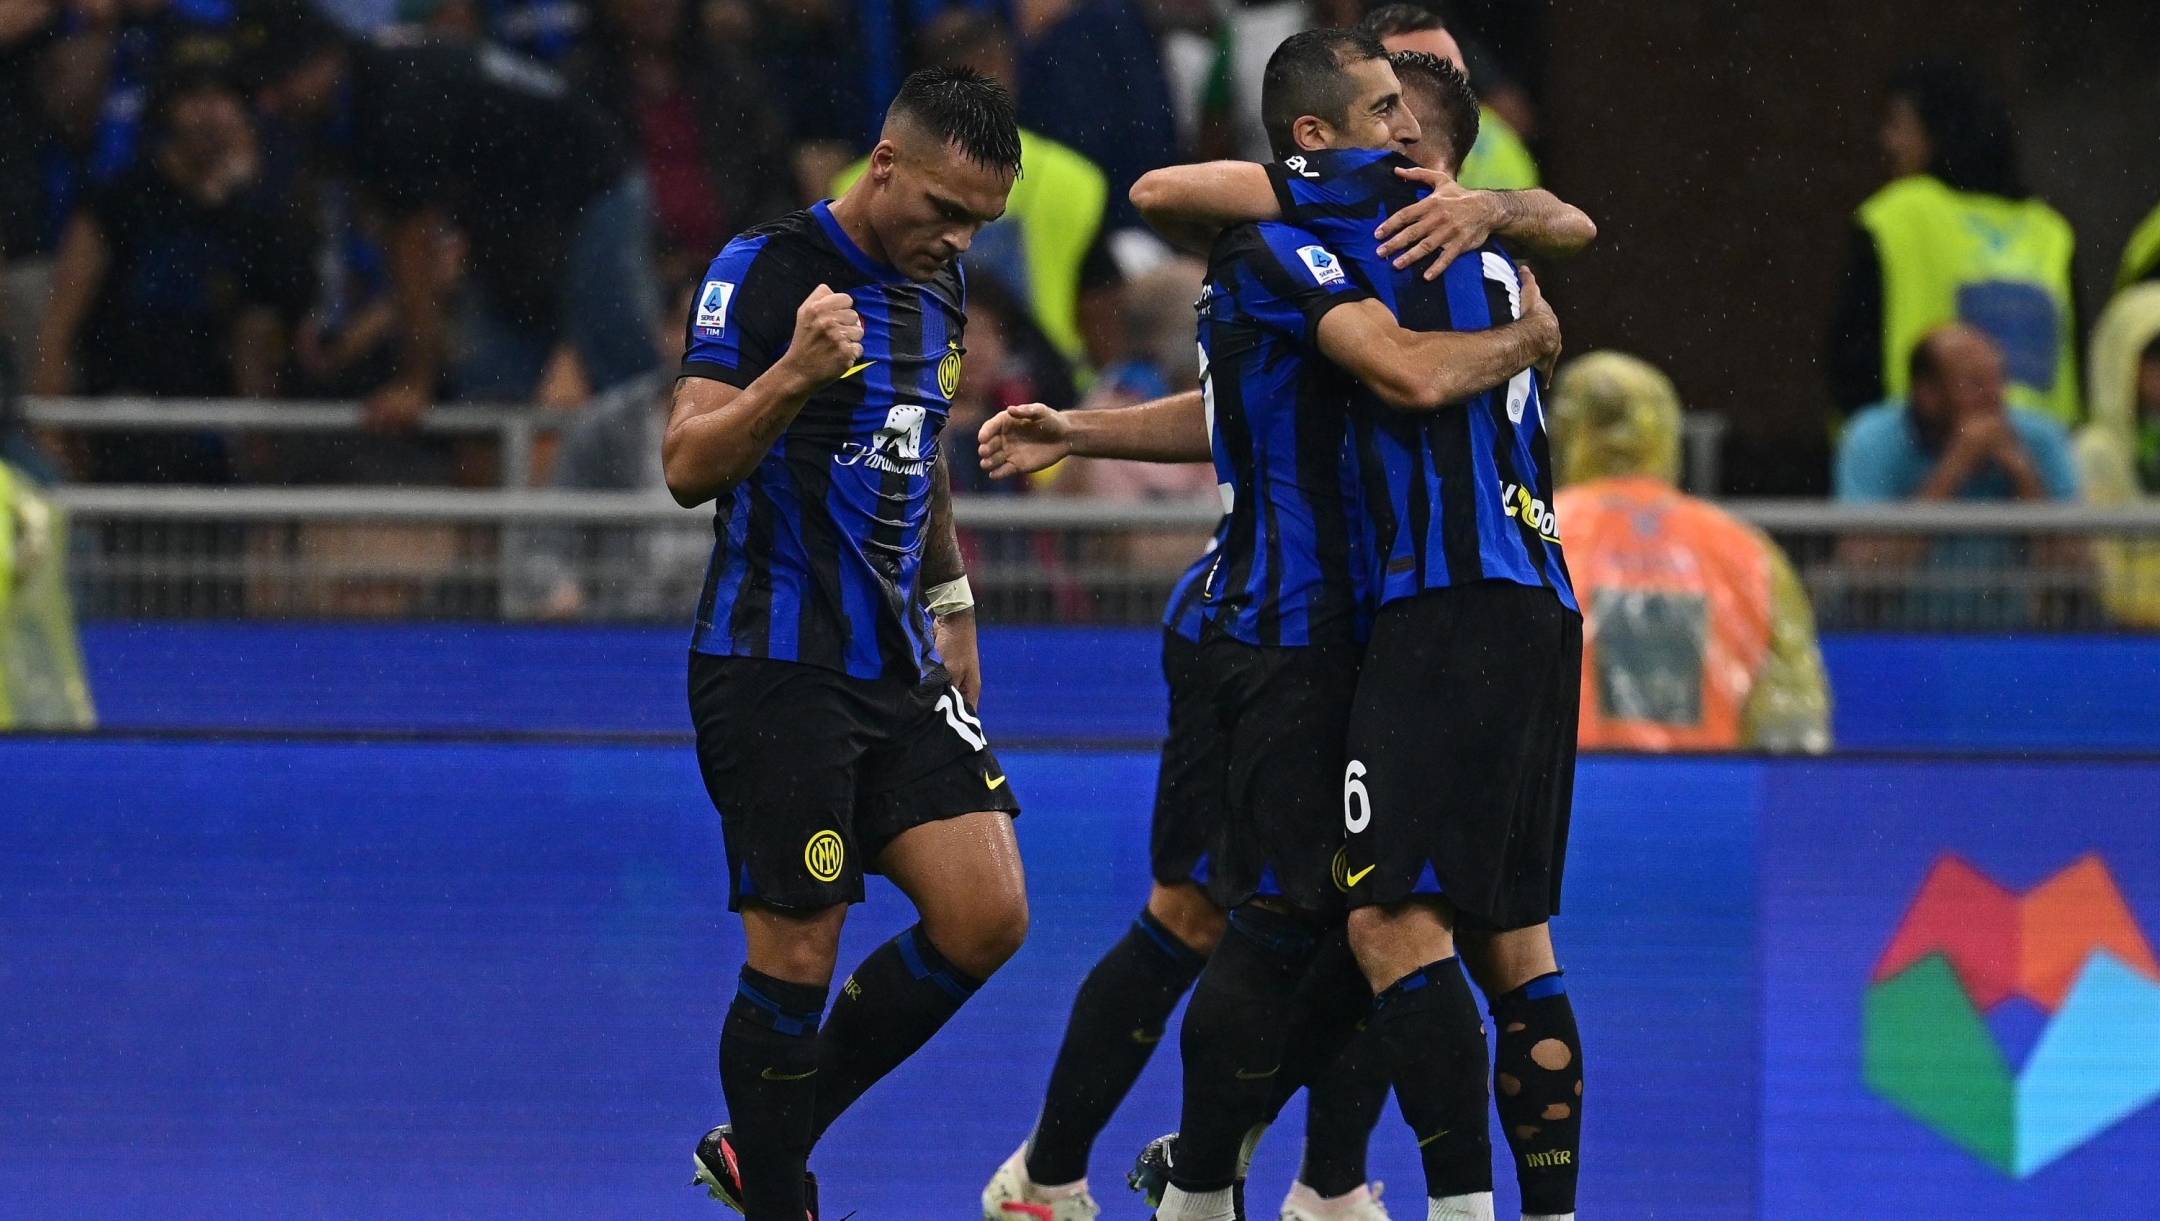 MILAN, ITALY - SEPTEMBER 16: Henrikh Mkhitaryan of FC Internazionale celebrates with teammates after scoring their team's third goal during the Serie A TIM match between FC Internazionale and AC Milan at Stadio Giuseppe Meazza on September 16, 2023 in Milan, Italy. (Photo by Mattia Ozbot - Inter/Inter via Getty Images)